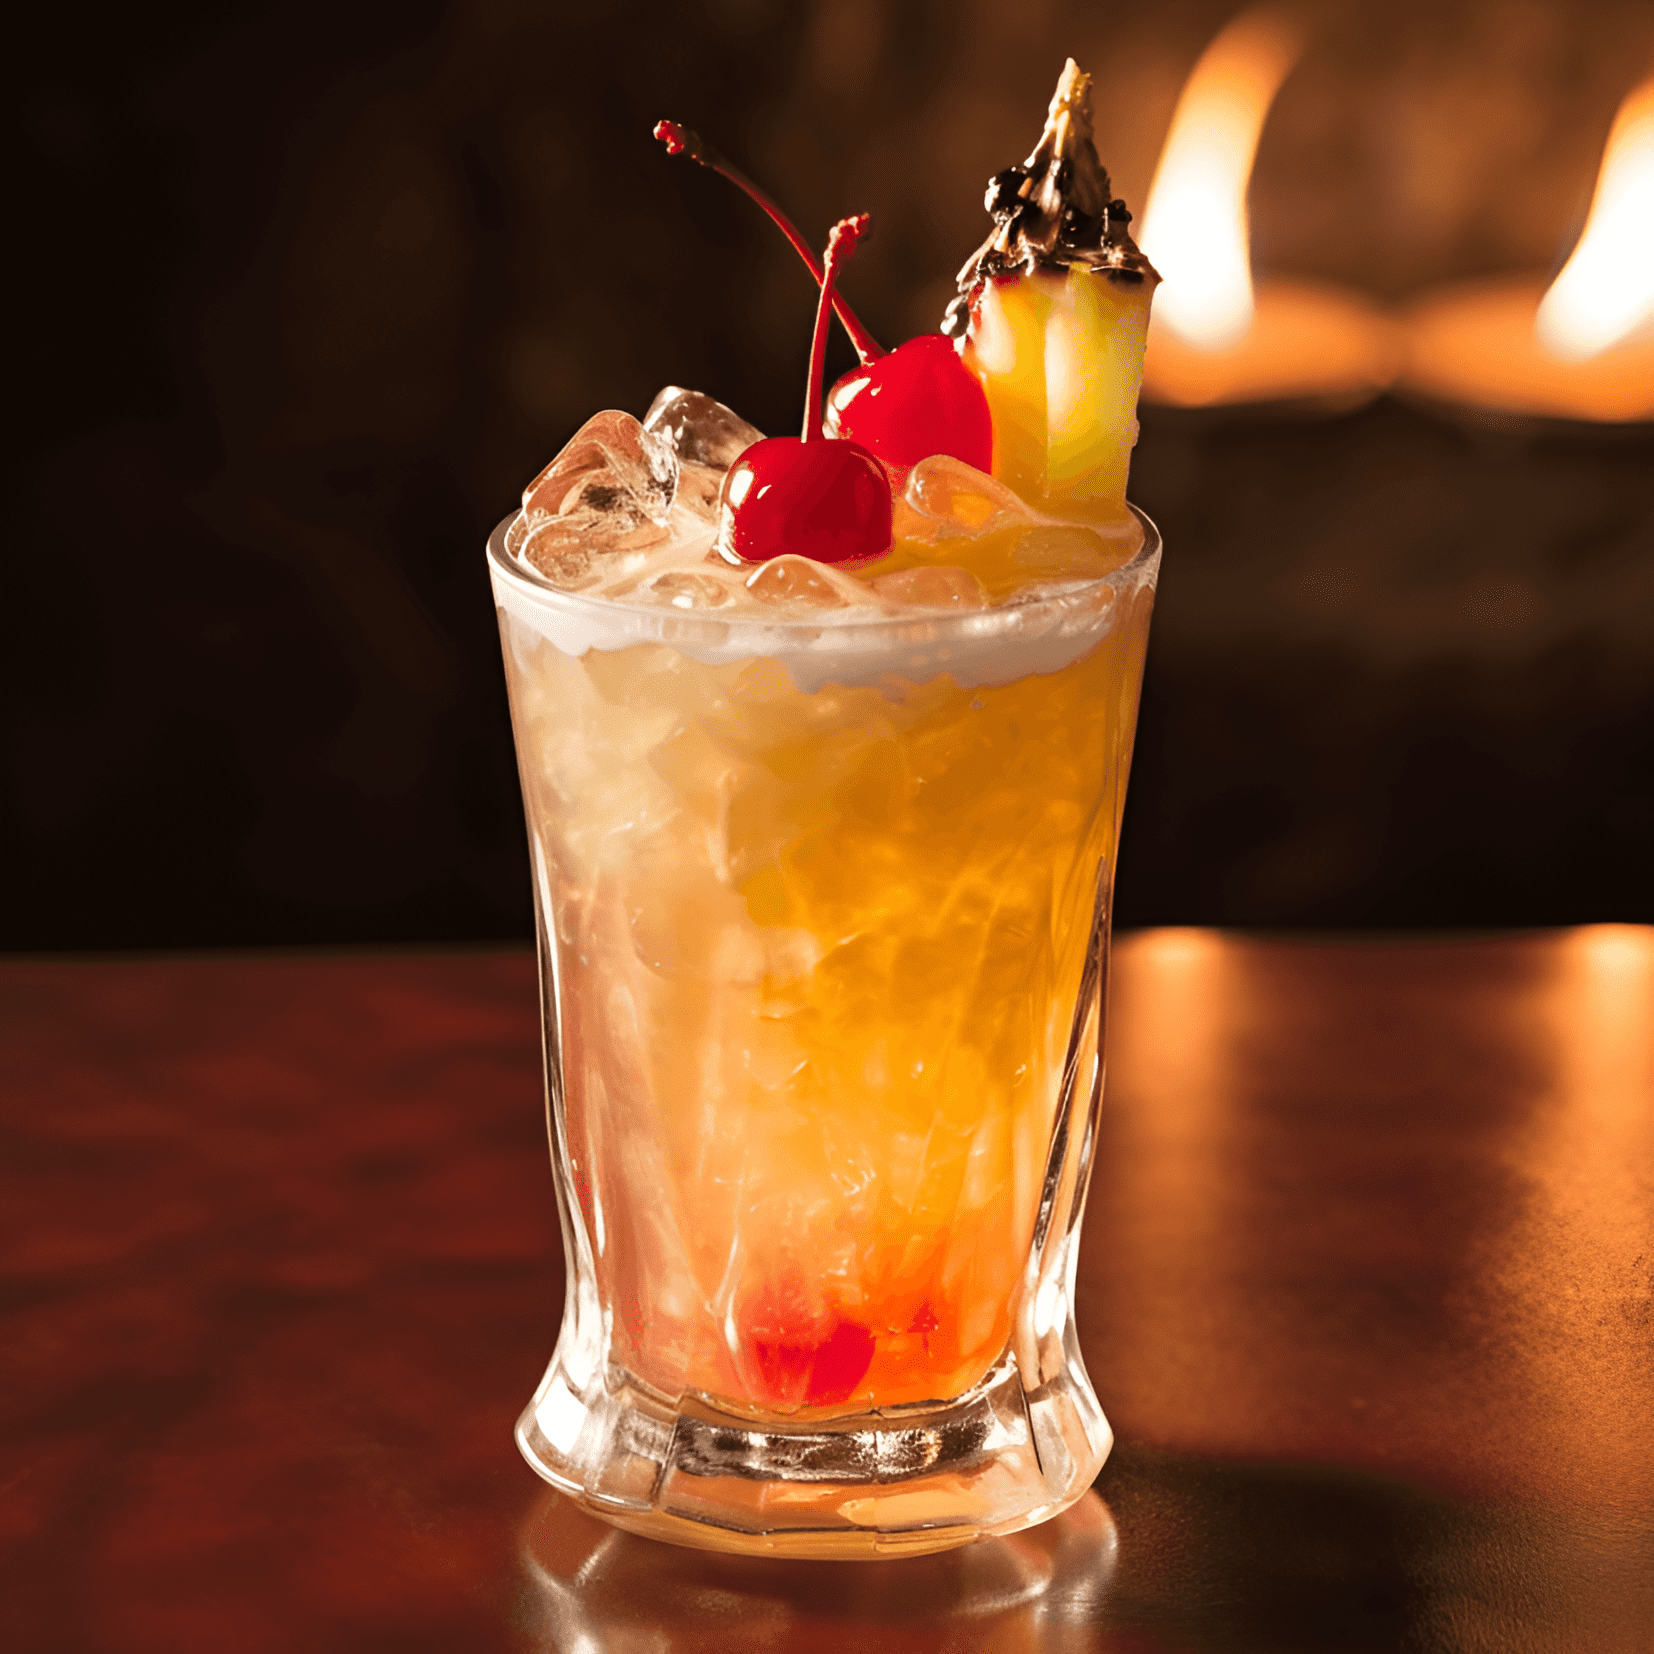 Tiki Torch Cocktail Recipe - The Tiki Torch cocktail is a delicious blend of sweet, sour, and fruity flavors. It has a strong, yet refreshing taste with a hint of spice from the ginger syrup. The combination of rum, pineapple, and lime creates a tropical sensation that is both invigorating and satisfying.